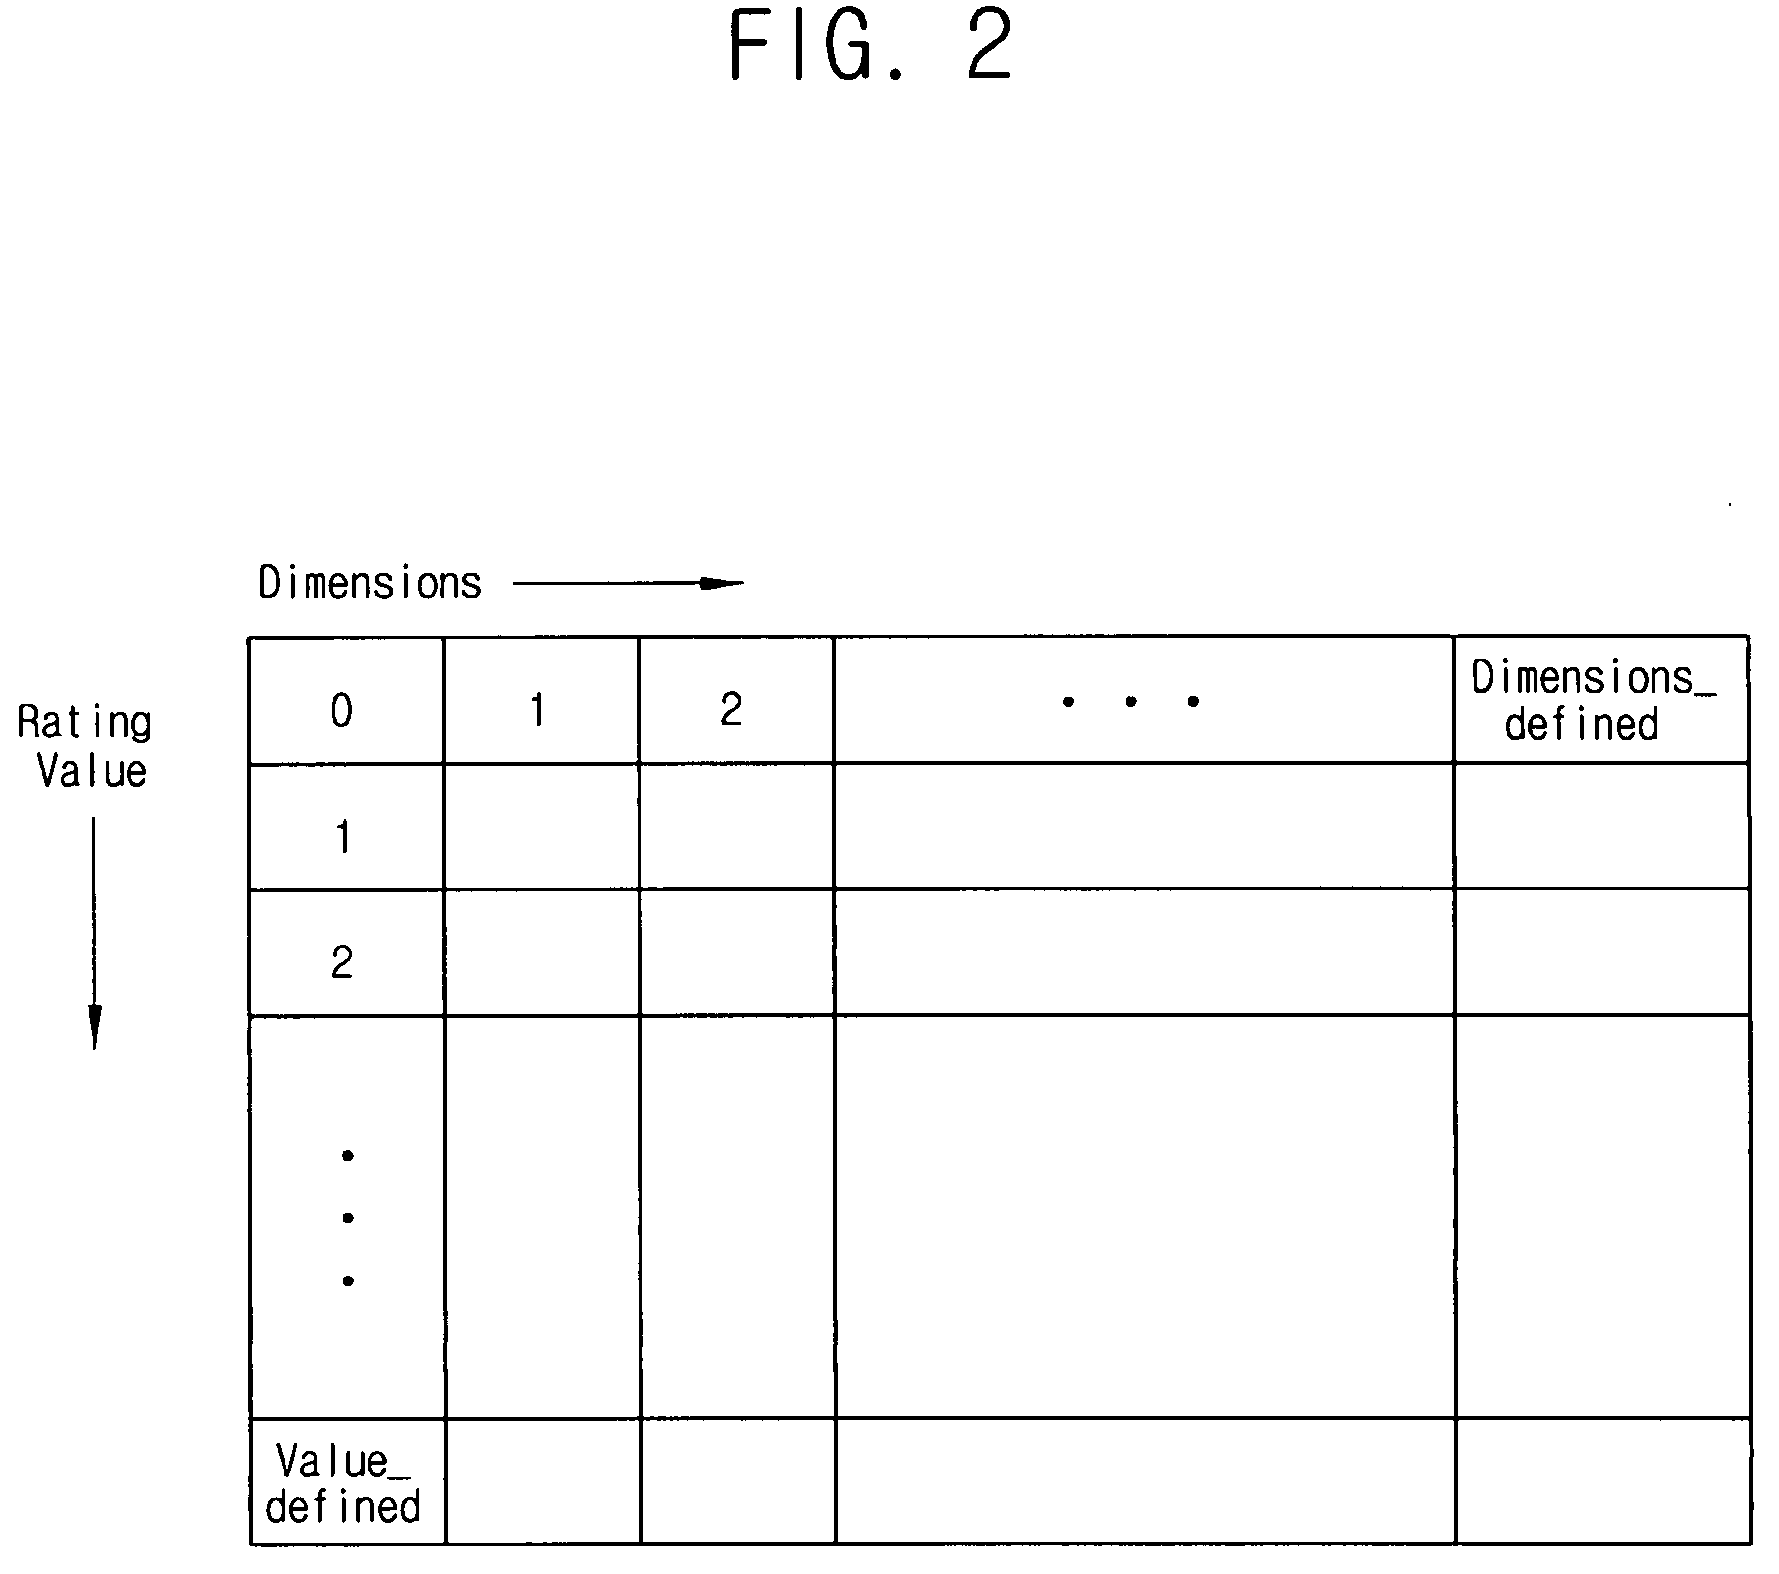 Broadcasting receiving apparatus and displaying method of user interface for setting parental lock